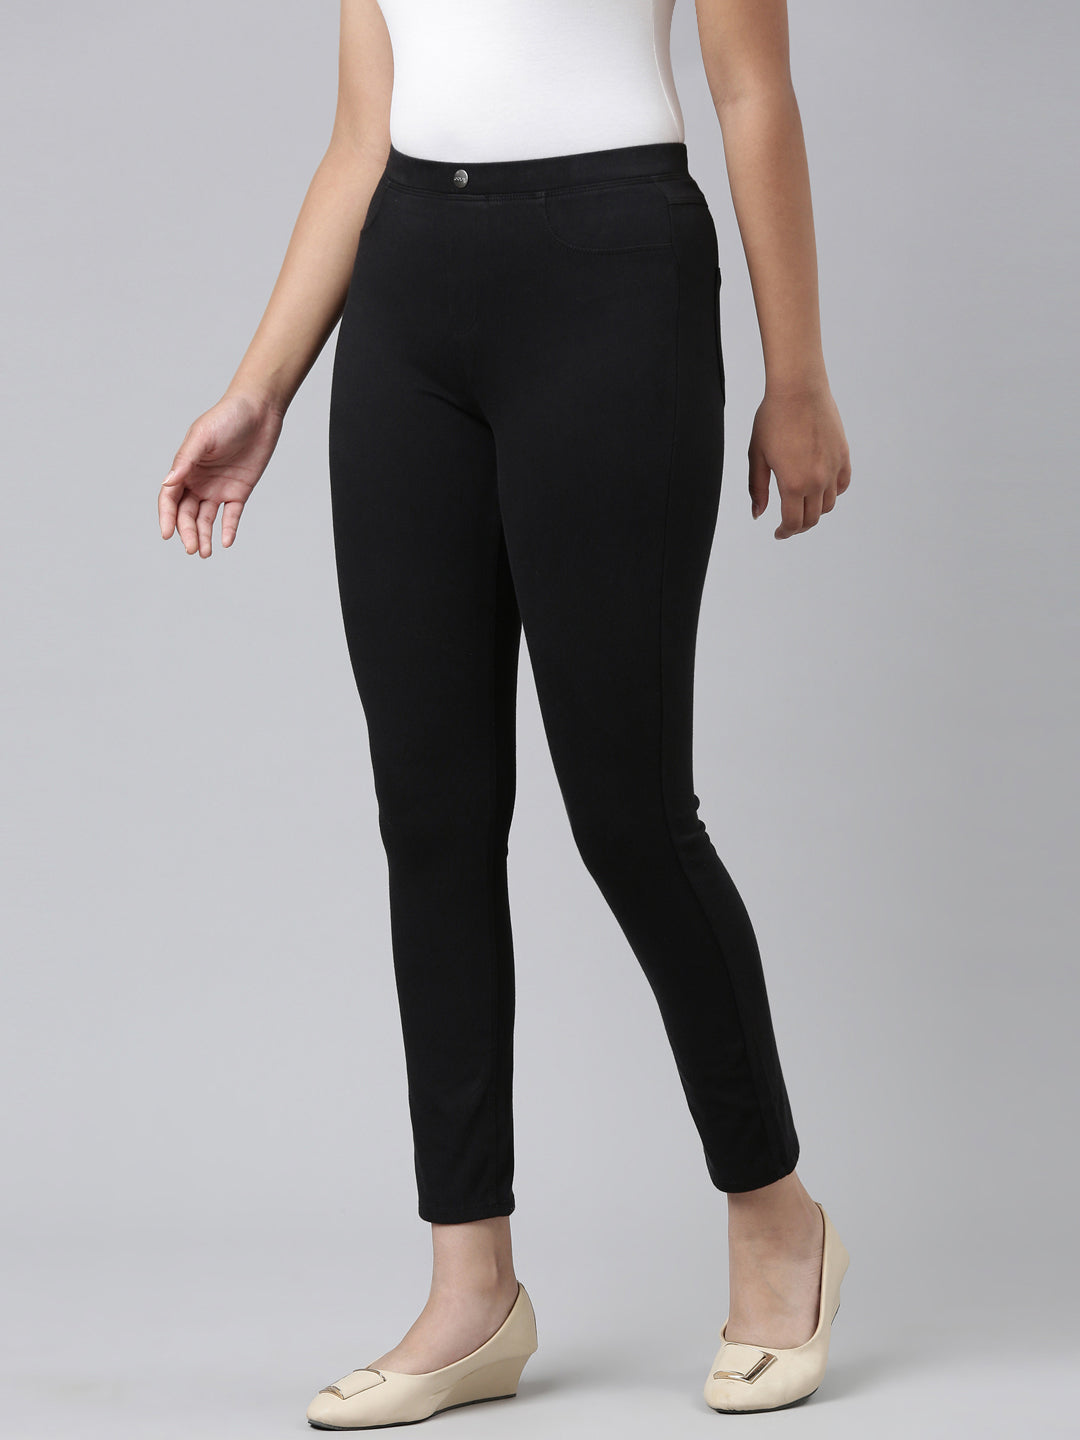 New Mix USA Solid Black Jeggings One Size - 55% off